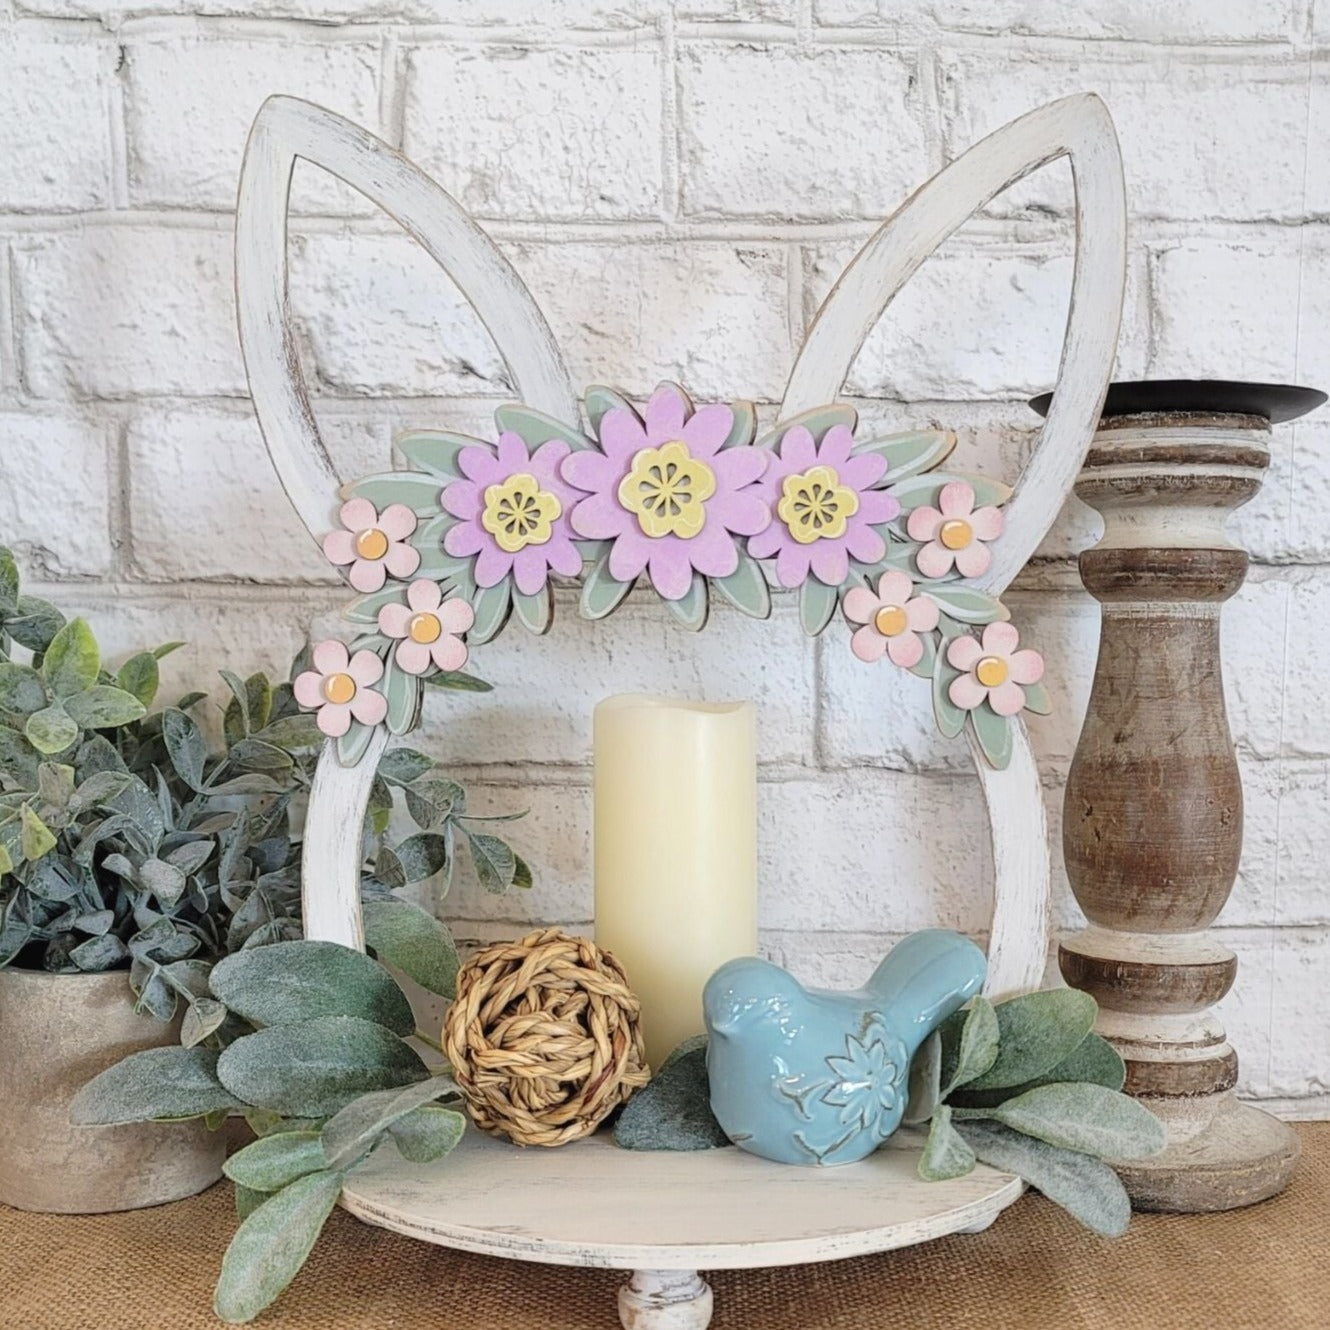 Charming wooden Easter tray with distressed chalk paint finish, featuring purple and pink flowers on a green leaf swag, and Easter bunny ears. Hand-painted and laser cut, this 2-sided tray can be enjoyed from all angles and is perfect for displaying candles with flowers or cookies. The tray also features unique repurposed sewing thread spools for feet, adding to its charm and eco-friendliness.